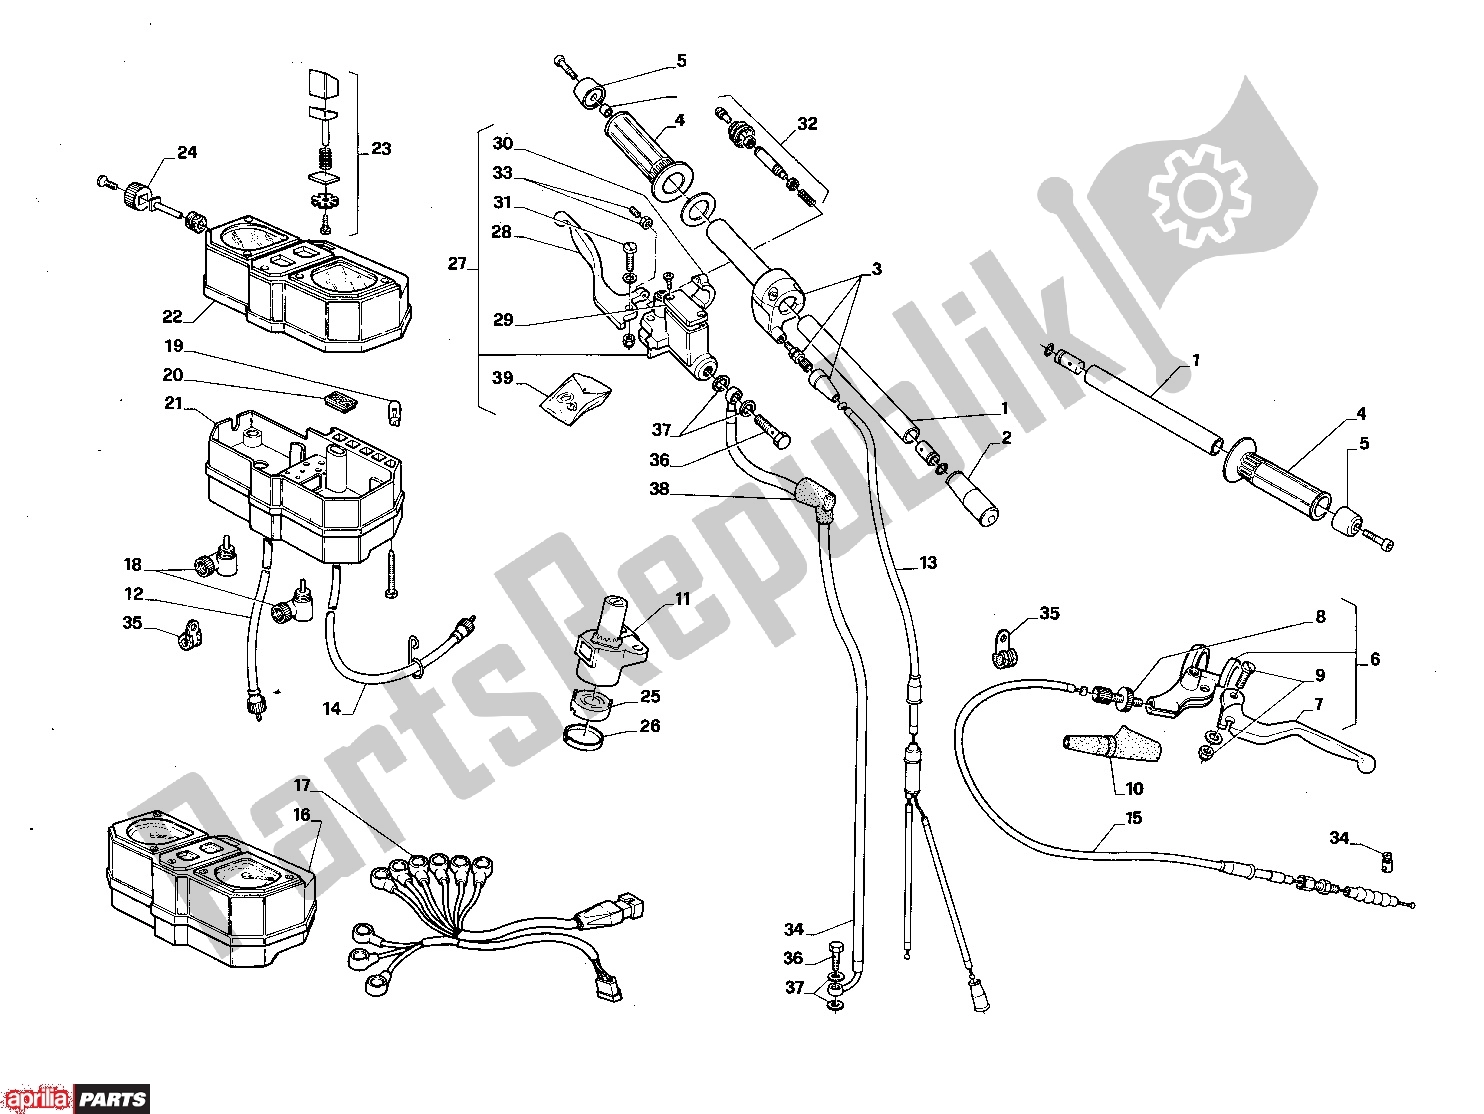 All parts for the Handle Bars of the Aprilia AF1 Project 108 306 50 1988